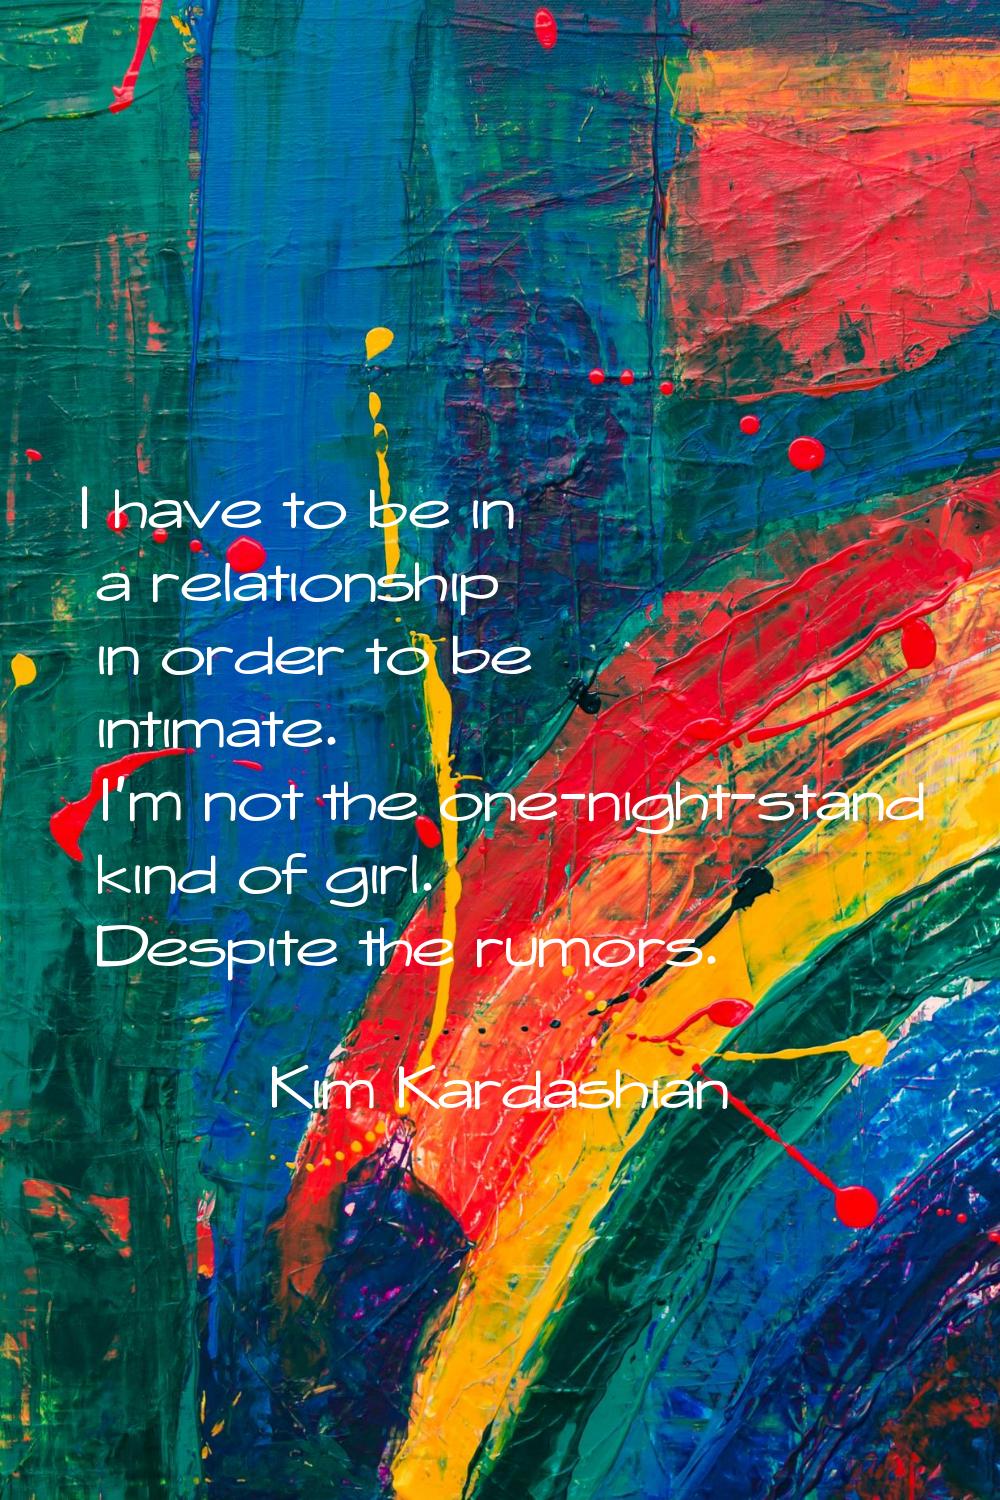 I have to be in a relationship in order to be intimate. I'm not the one-night-stand kind of girl. D